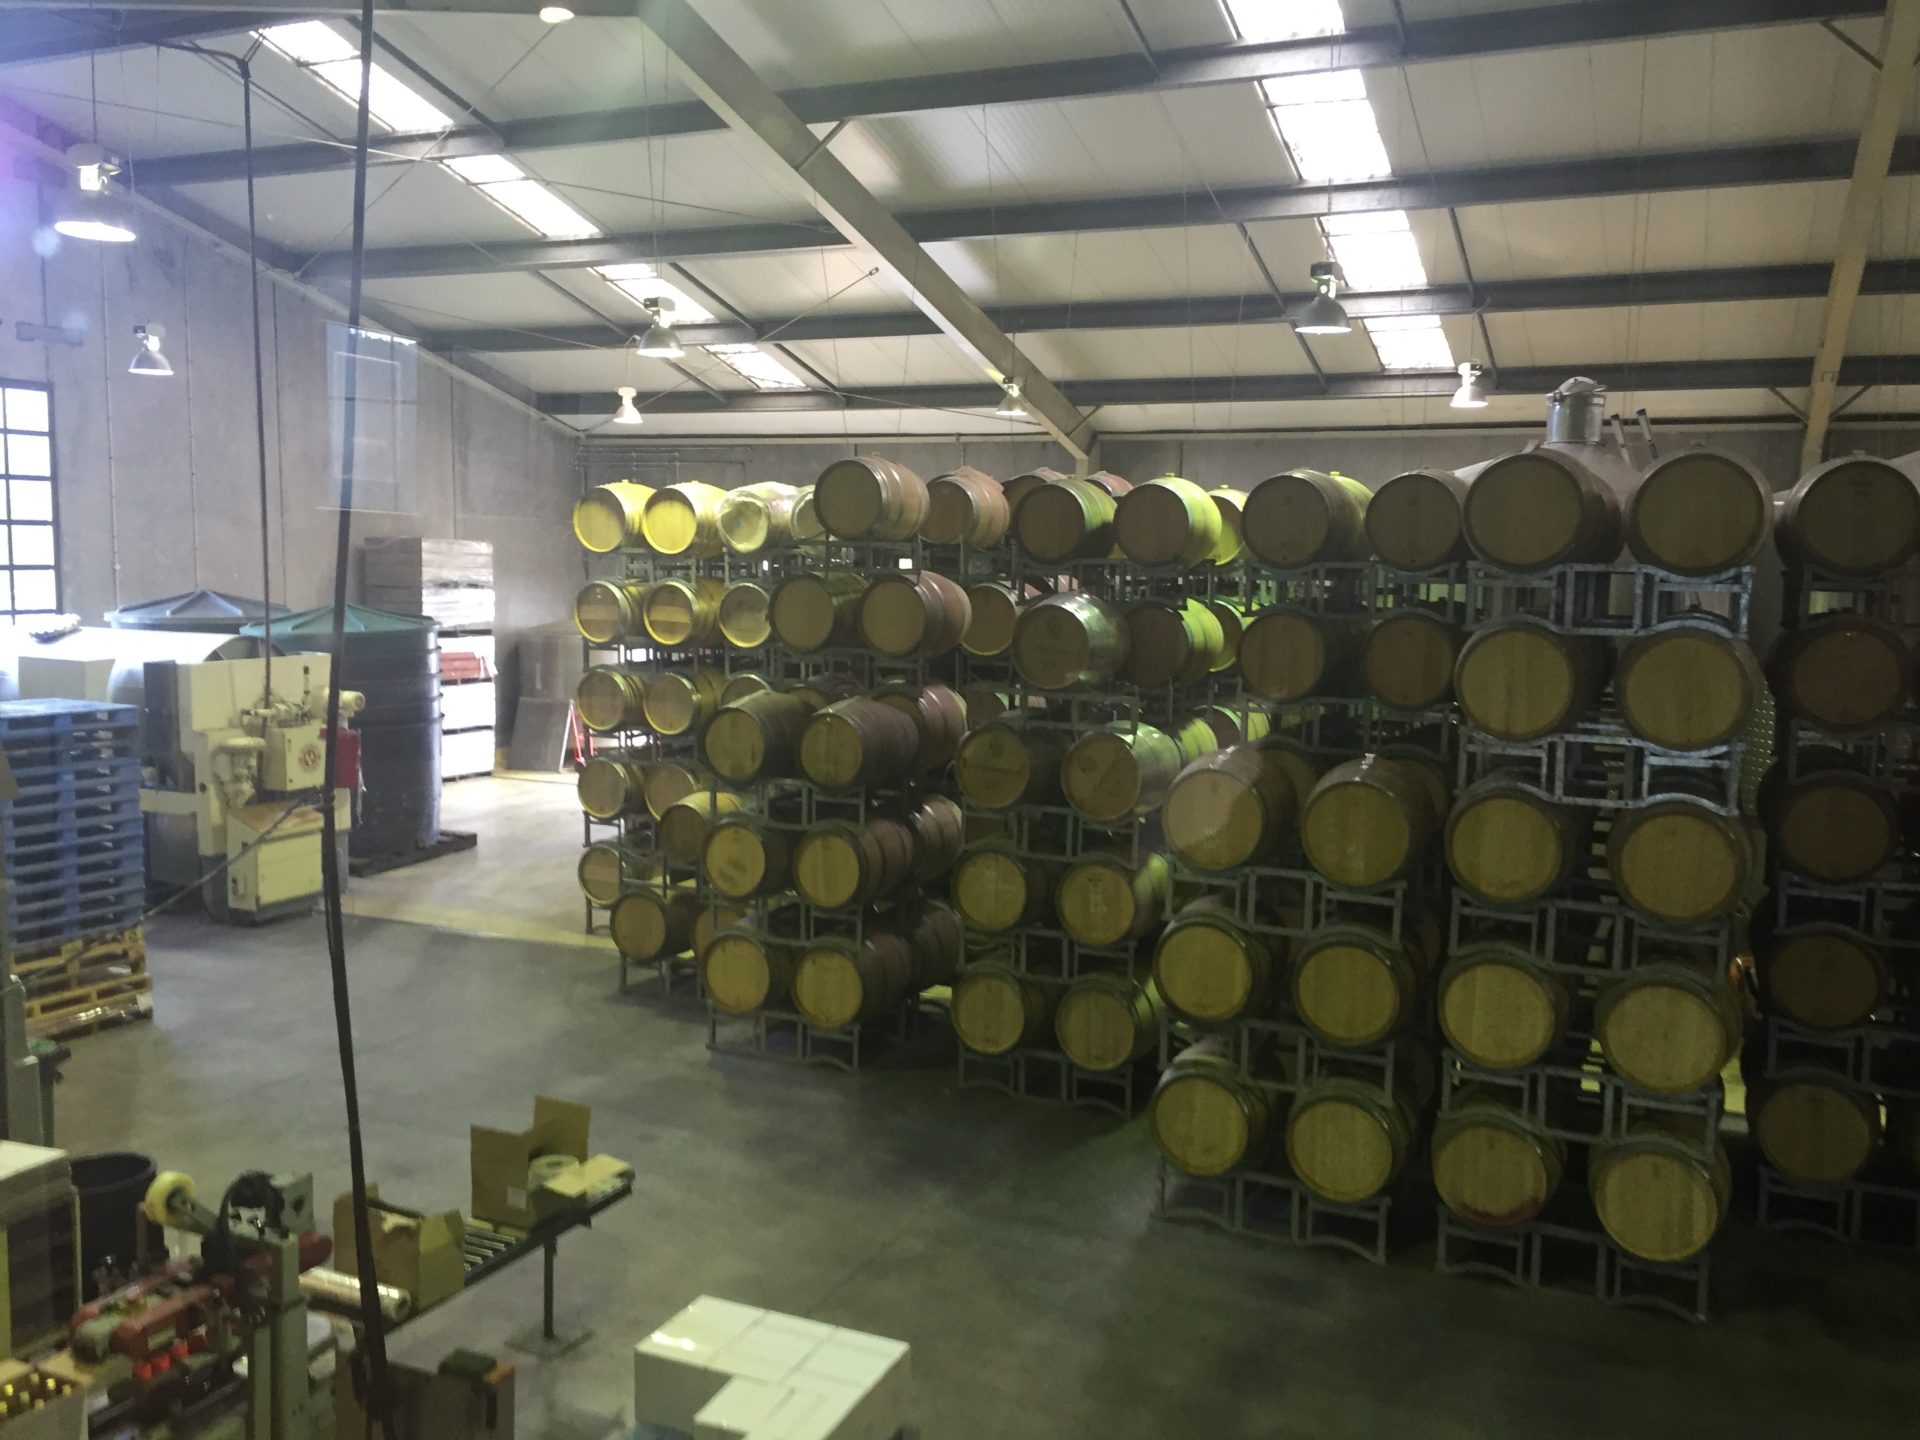 a large room with barrels stacked on top of each other